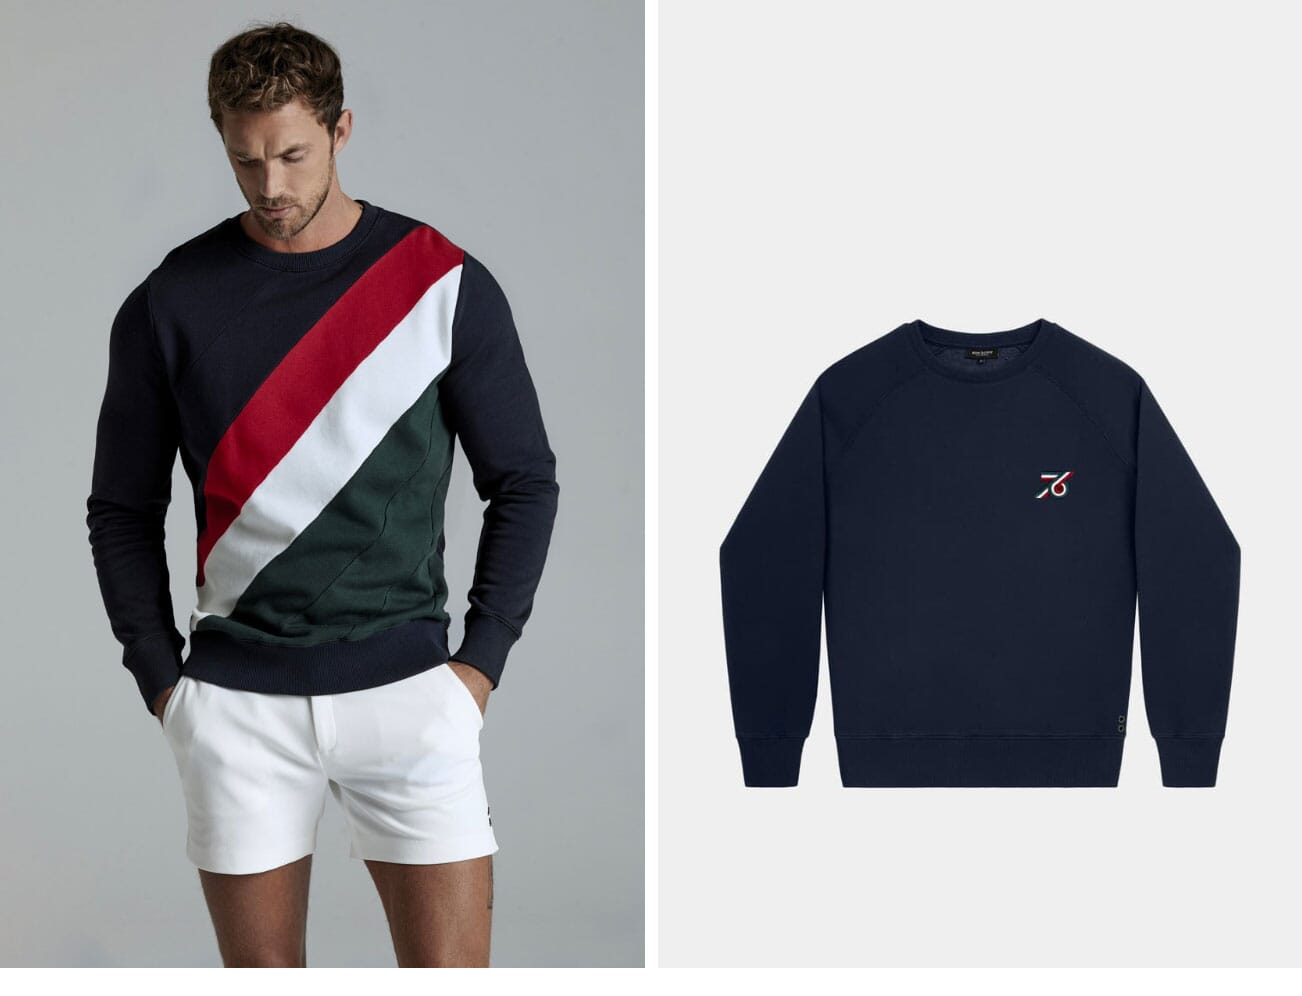 Ron Dorff: The Modern Men's Sportswear Brand That You Need To Know